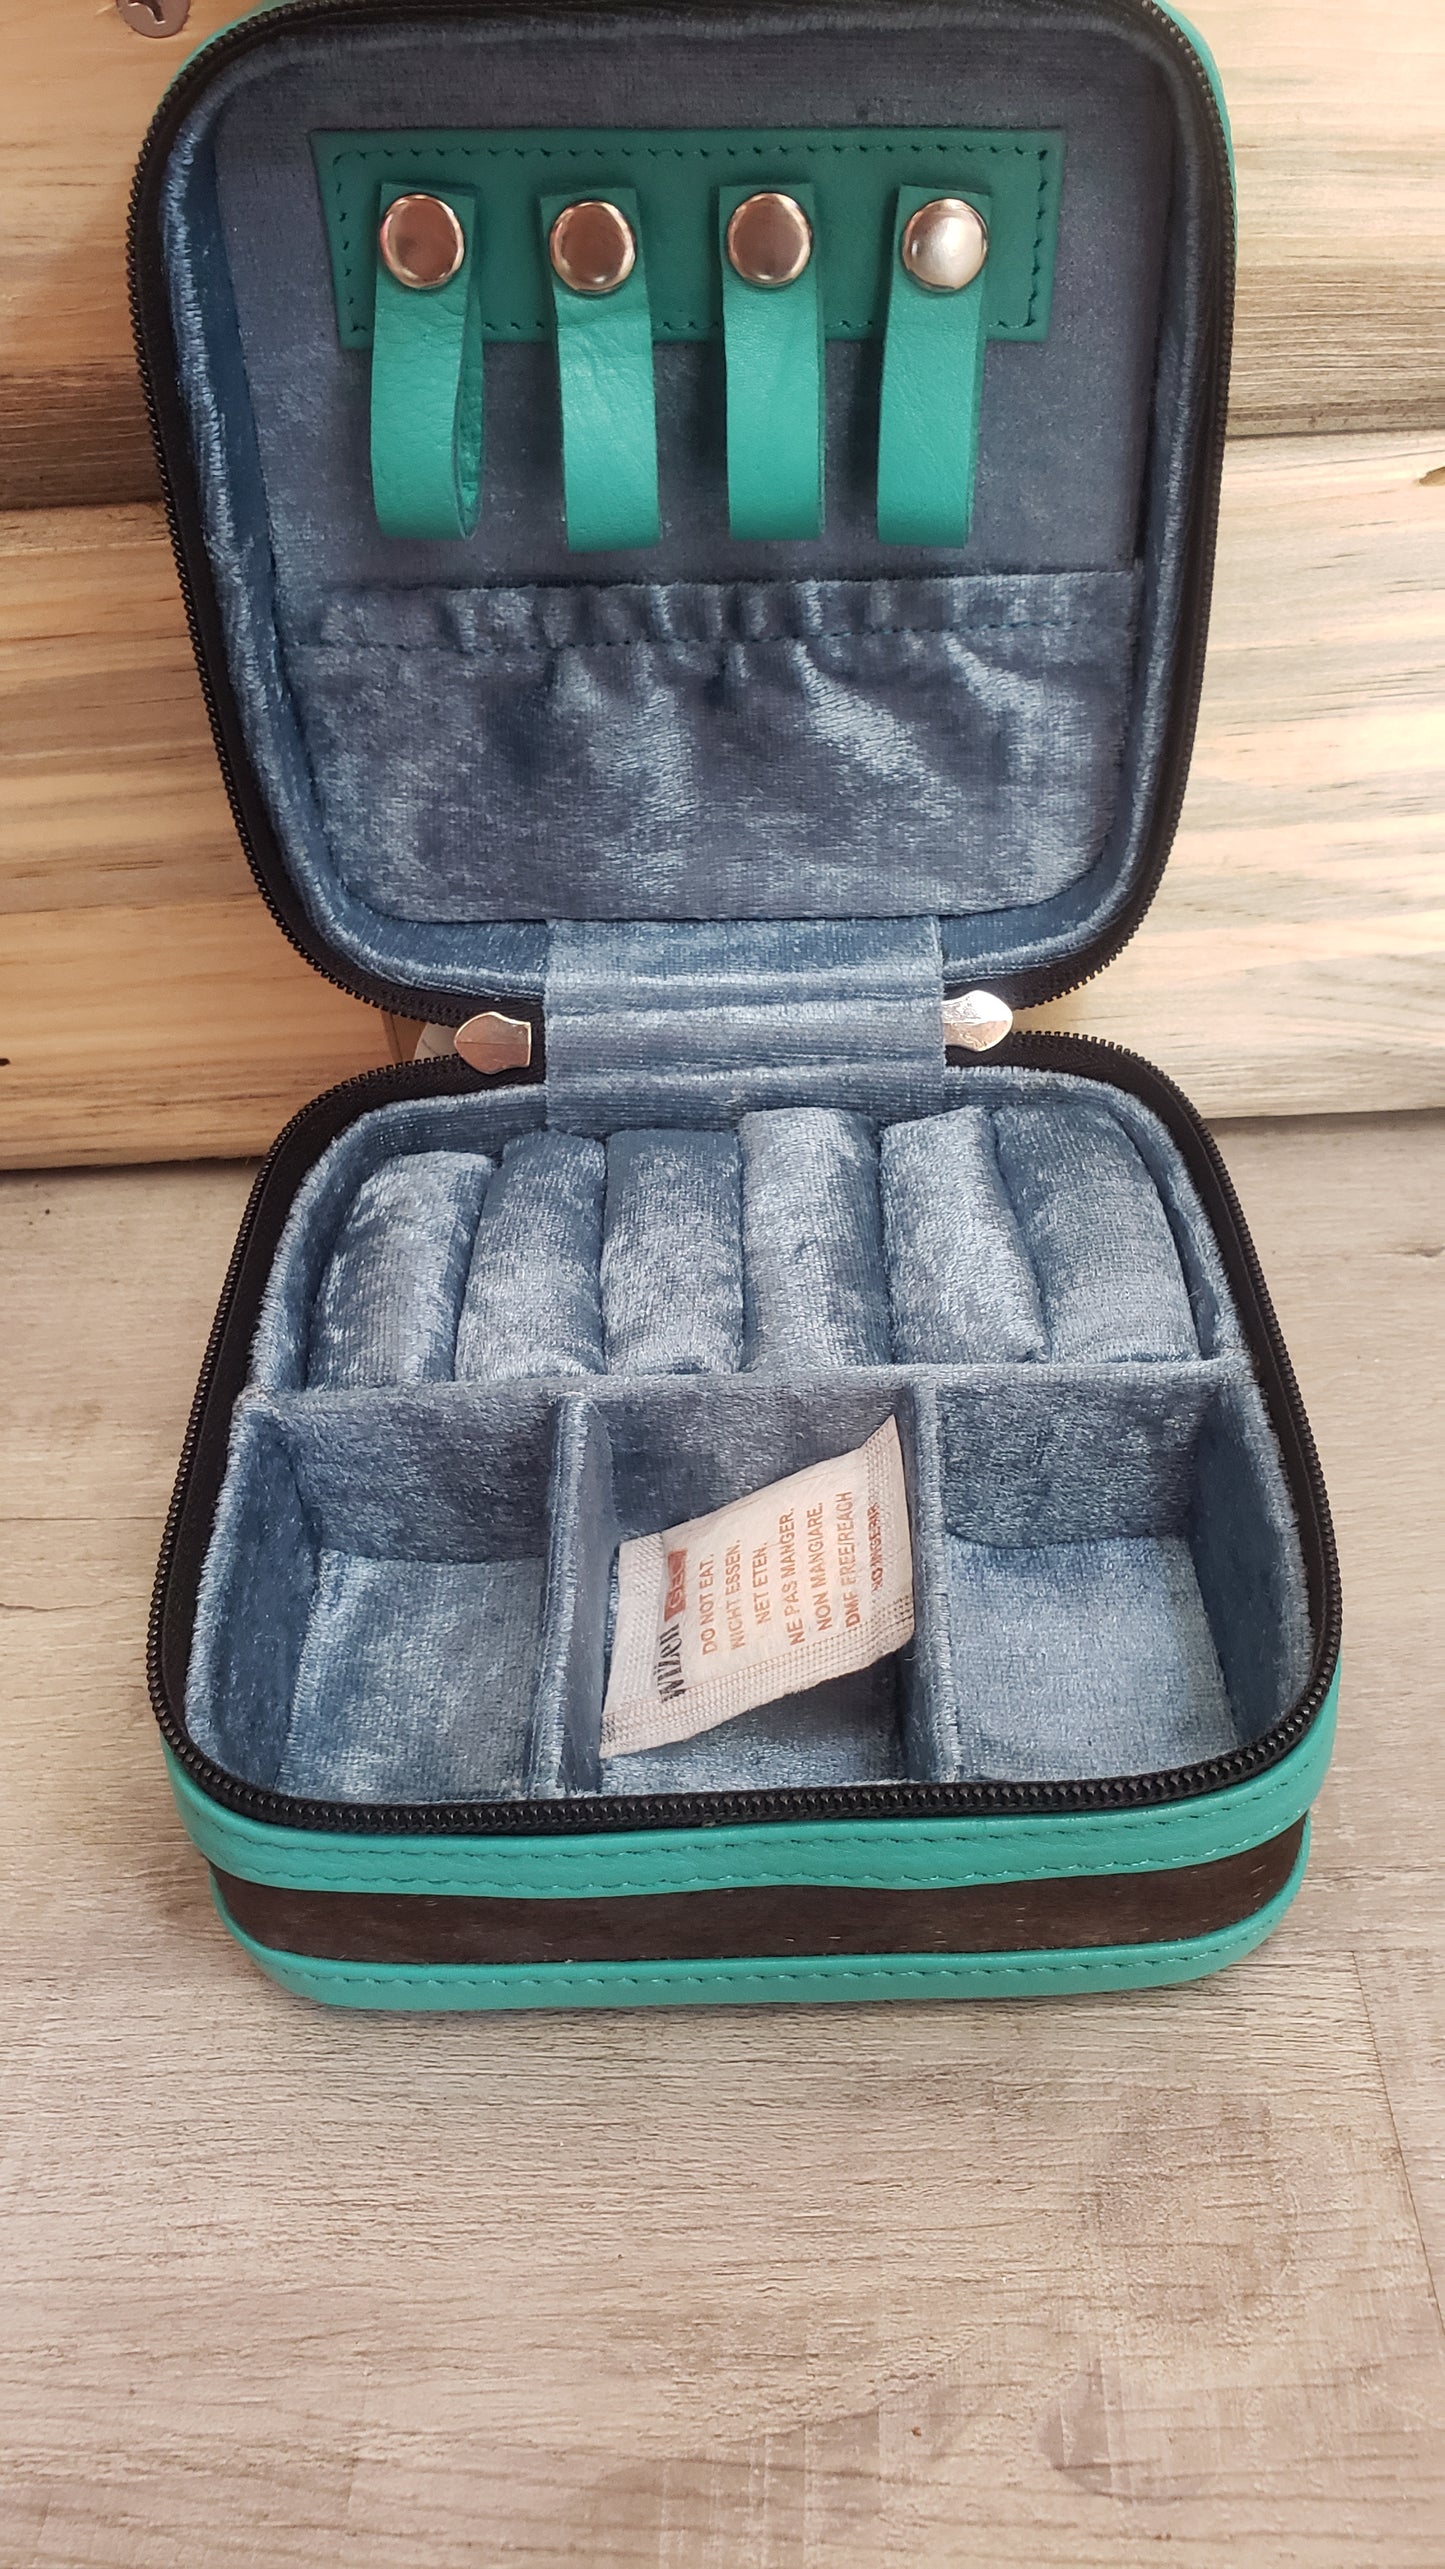 Cowhide Jewelry Box - Turquoise Leather